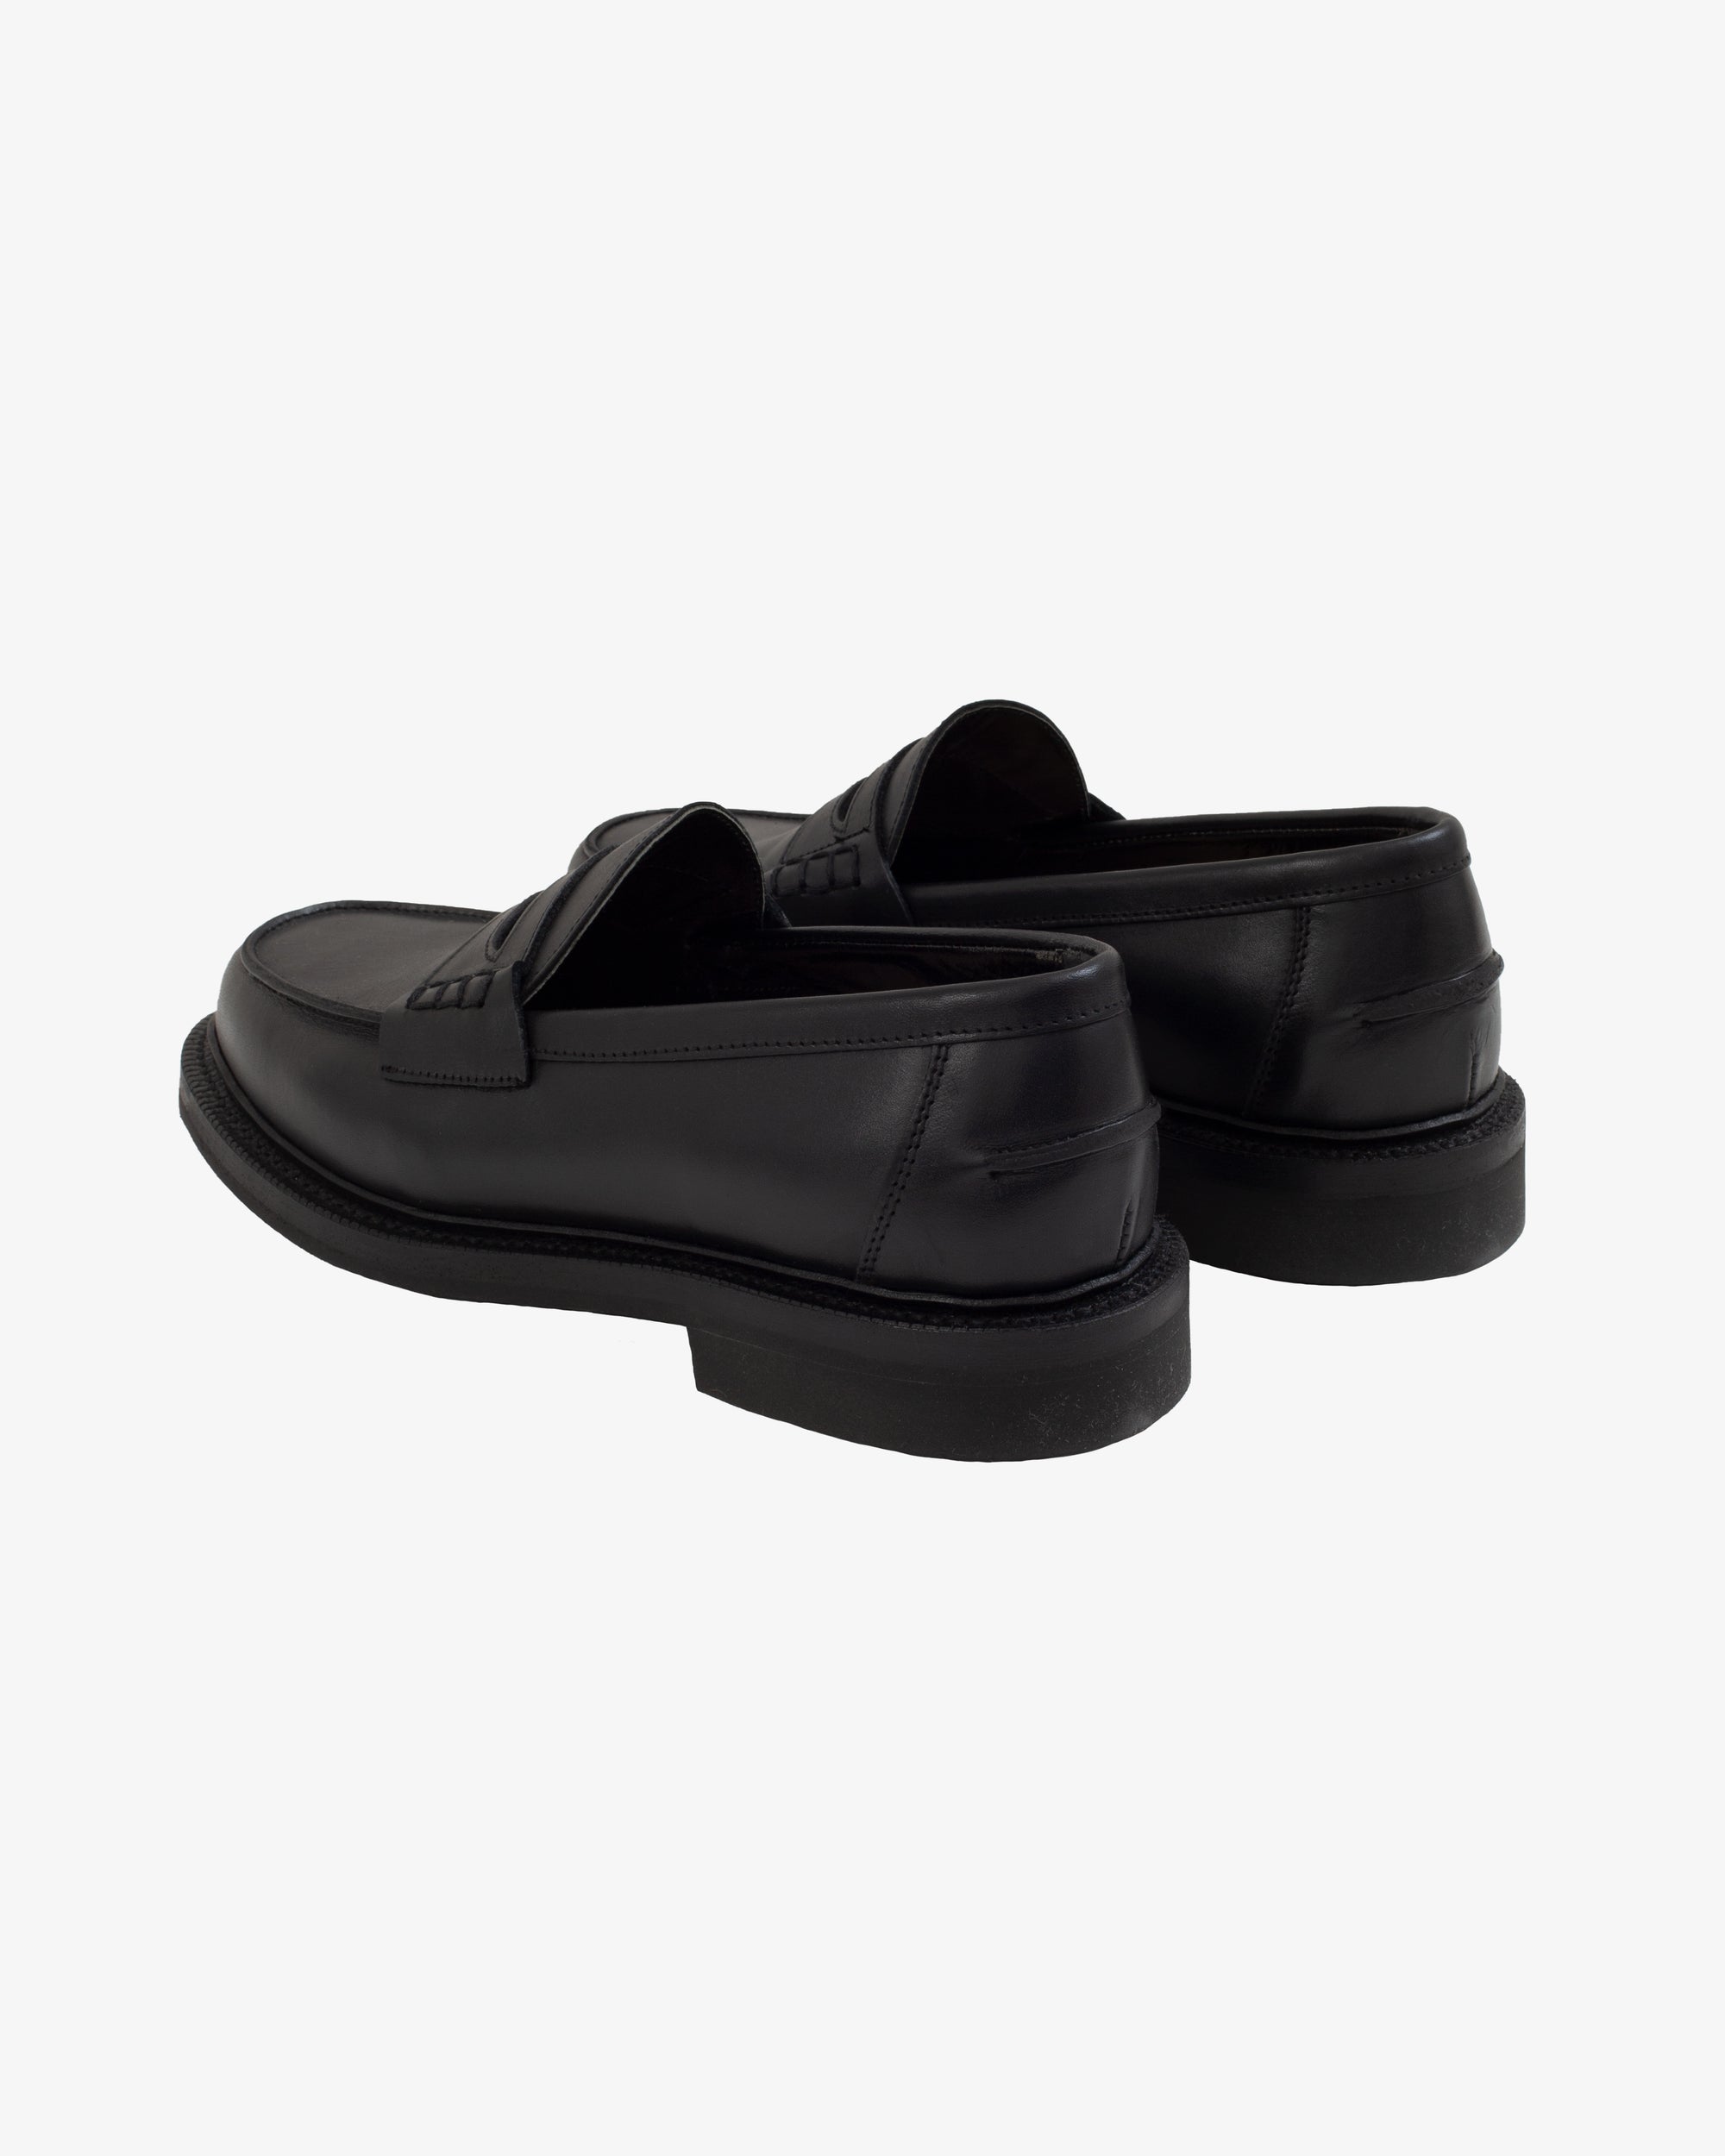 PEACEFUL BEEF ROLL LOAFER - BLACK WAXY LEATHER